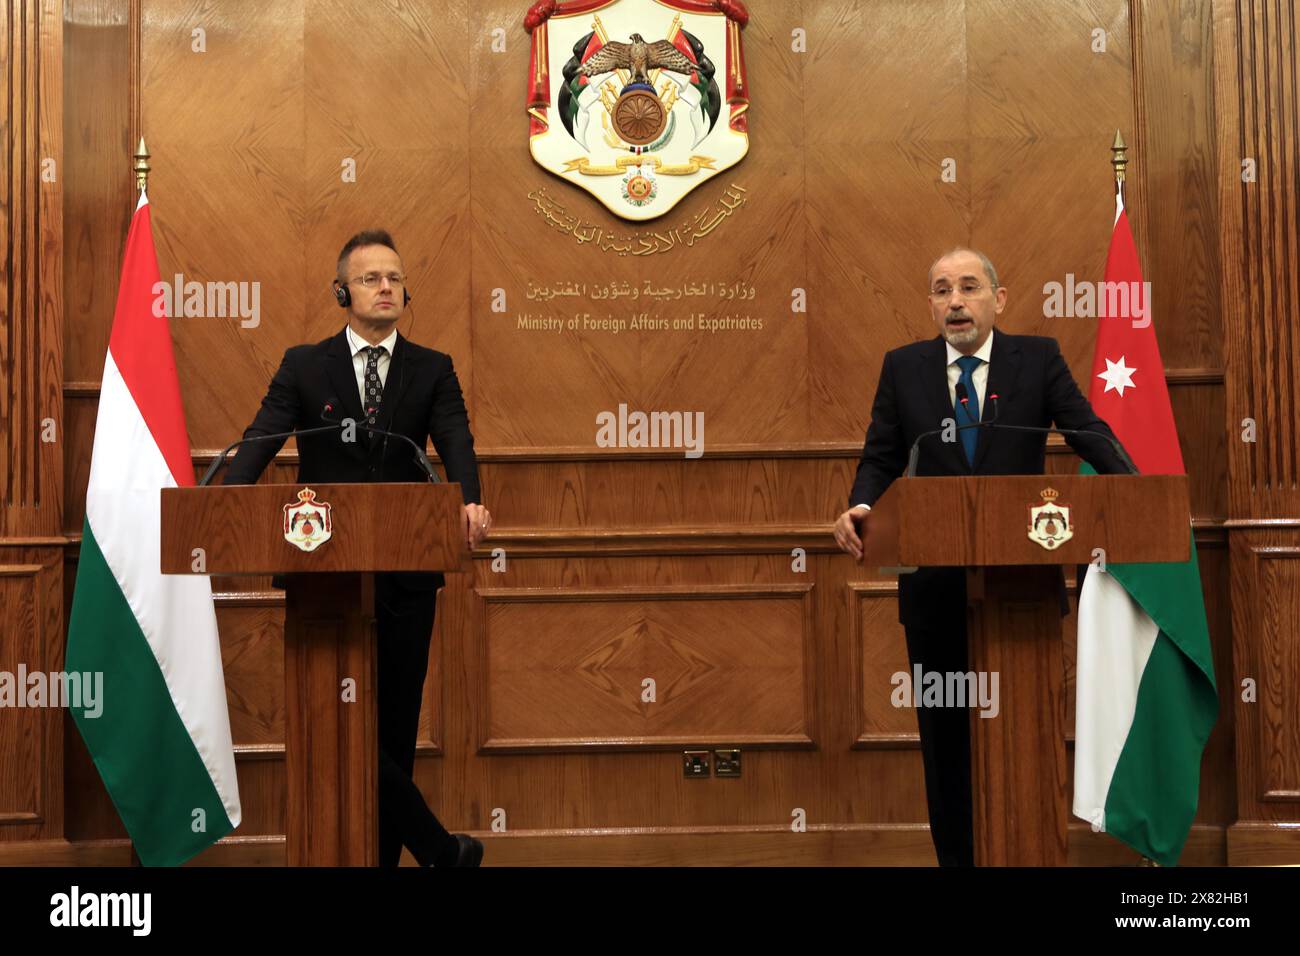 Amman, Jordan. 22nd May, 2024. Jordanian Foreign Minister Ayman Safadi (R) and Hungarian Minister of Foreign Affairs and Trade Peter Szijjarto attend a joint press conference in Amman, Jordan, on May 22, 2024. Jordanian Foreign Minister Ayman Safadi said on Wednesday the situation in the West Bank was worsening, blaming Israel's 'illegal and repressive measures' for killing opportunities for peace. Safadi made the remarks during a joint press conference in Amman with visiting Hungarian Minister of Foreign Affairs and Trade Peter Szijjarto. Credit: Mohammad Abu Ghosh/Xinhua/Alamy Live News Stock Photo